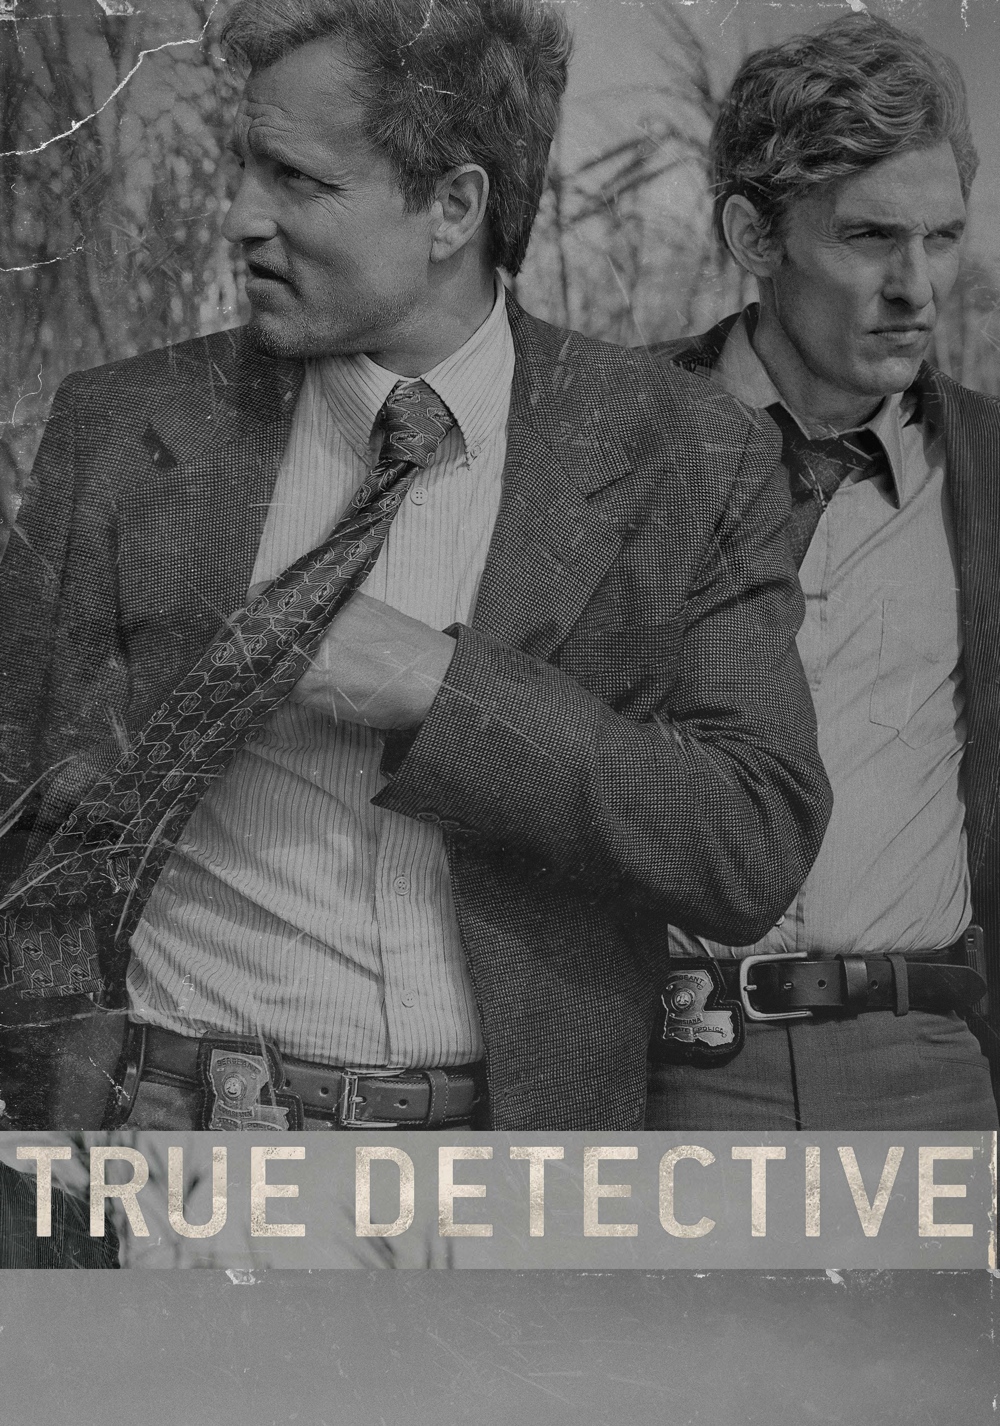 The ‘Heart of Darkness’ at ‘True Detective’s Core